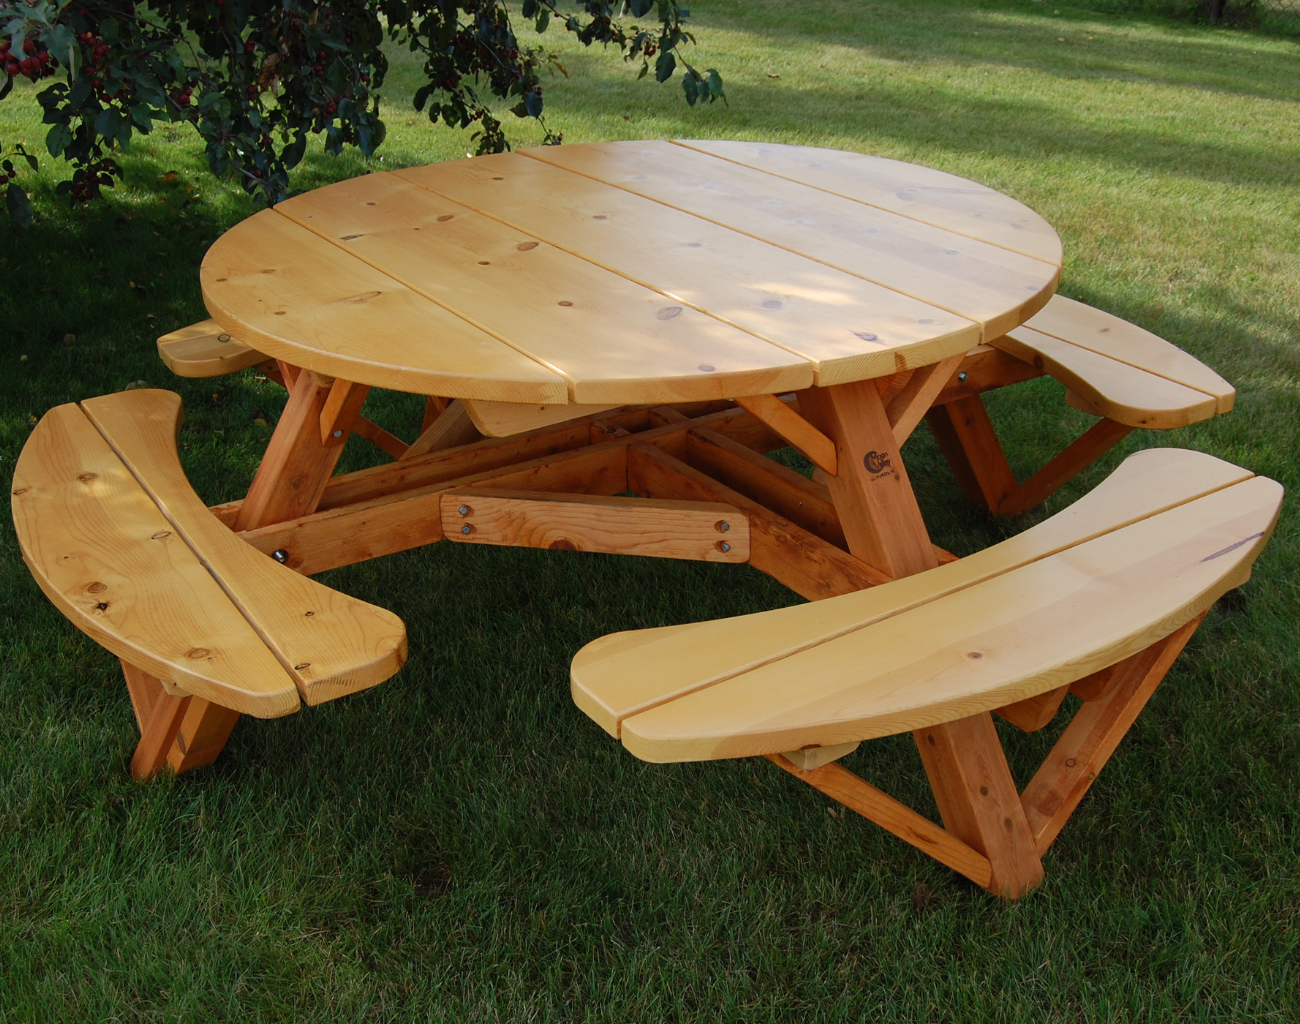 Moon Valley Rustic Cedar Log 56-Inch Round Picnic Table with Attached Benches